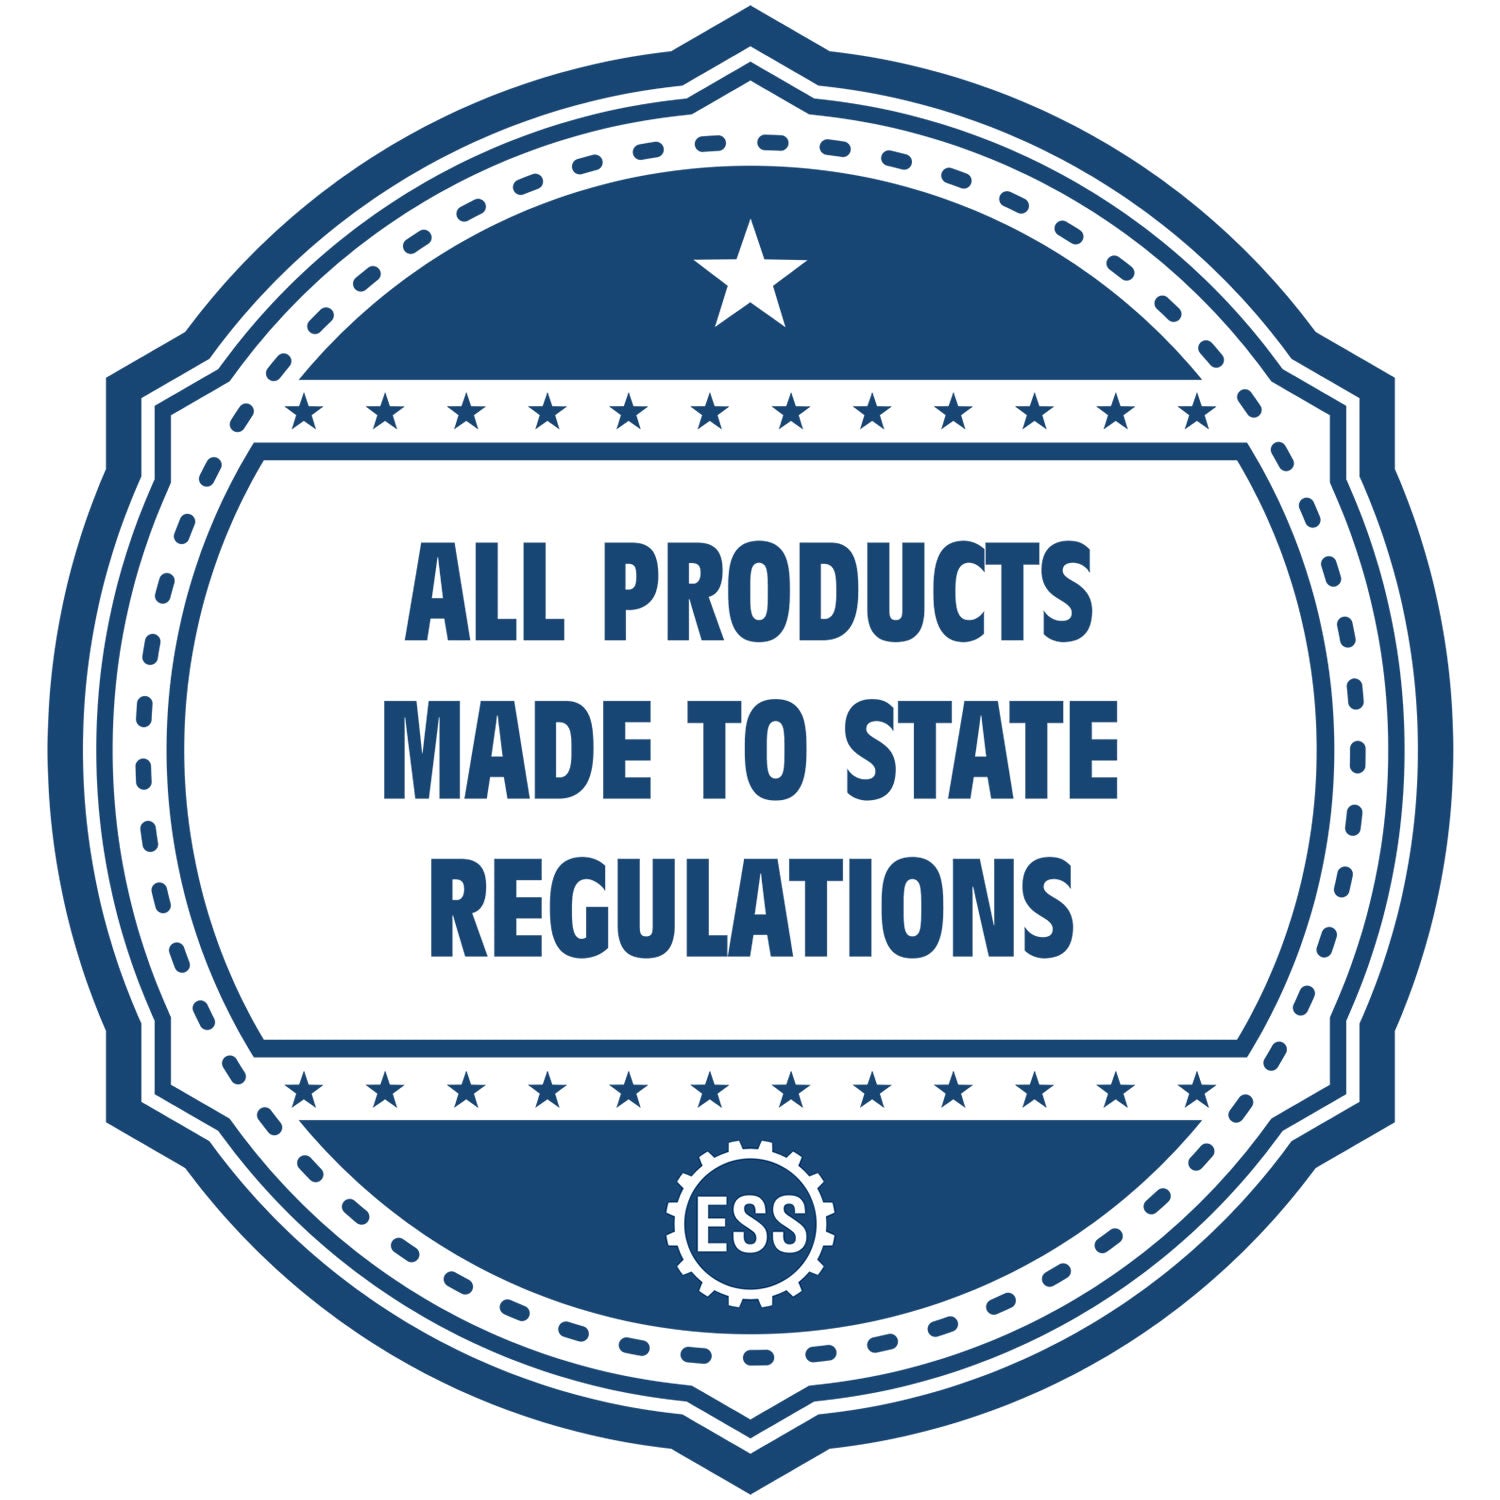 An icon or badge element for the Heavy Duty Cast Iron Utah Engineer Seal Embosser showing that this product is made in compliance with state regulations.